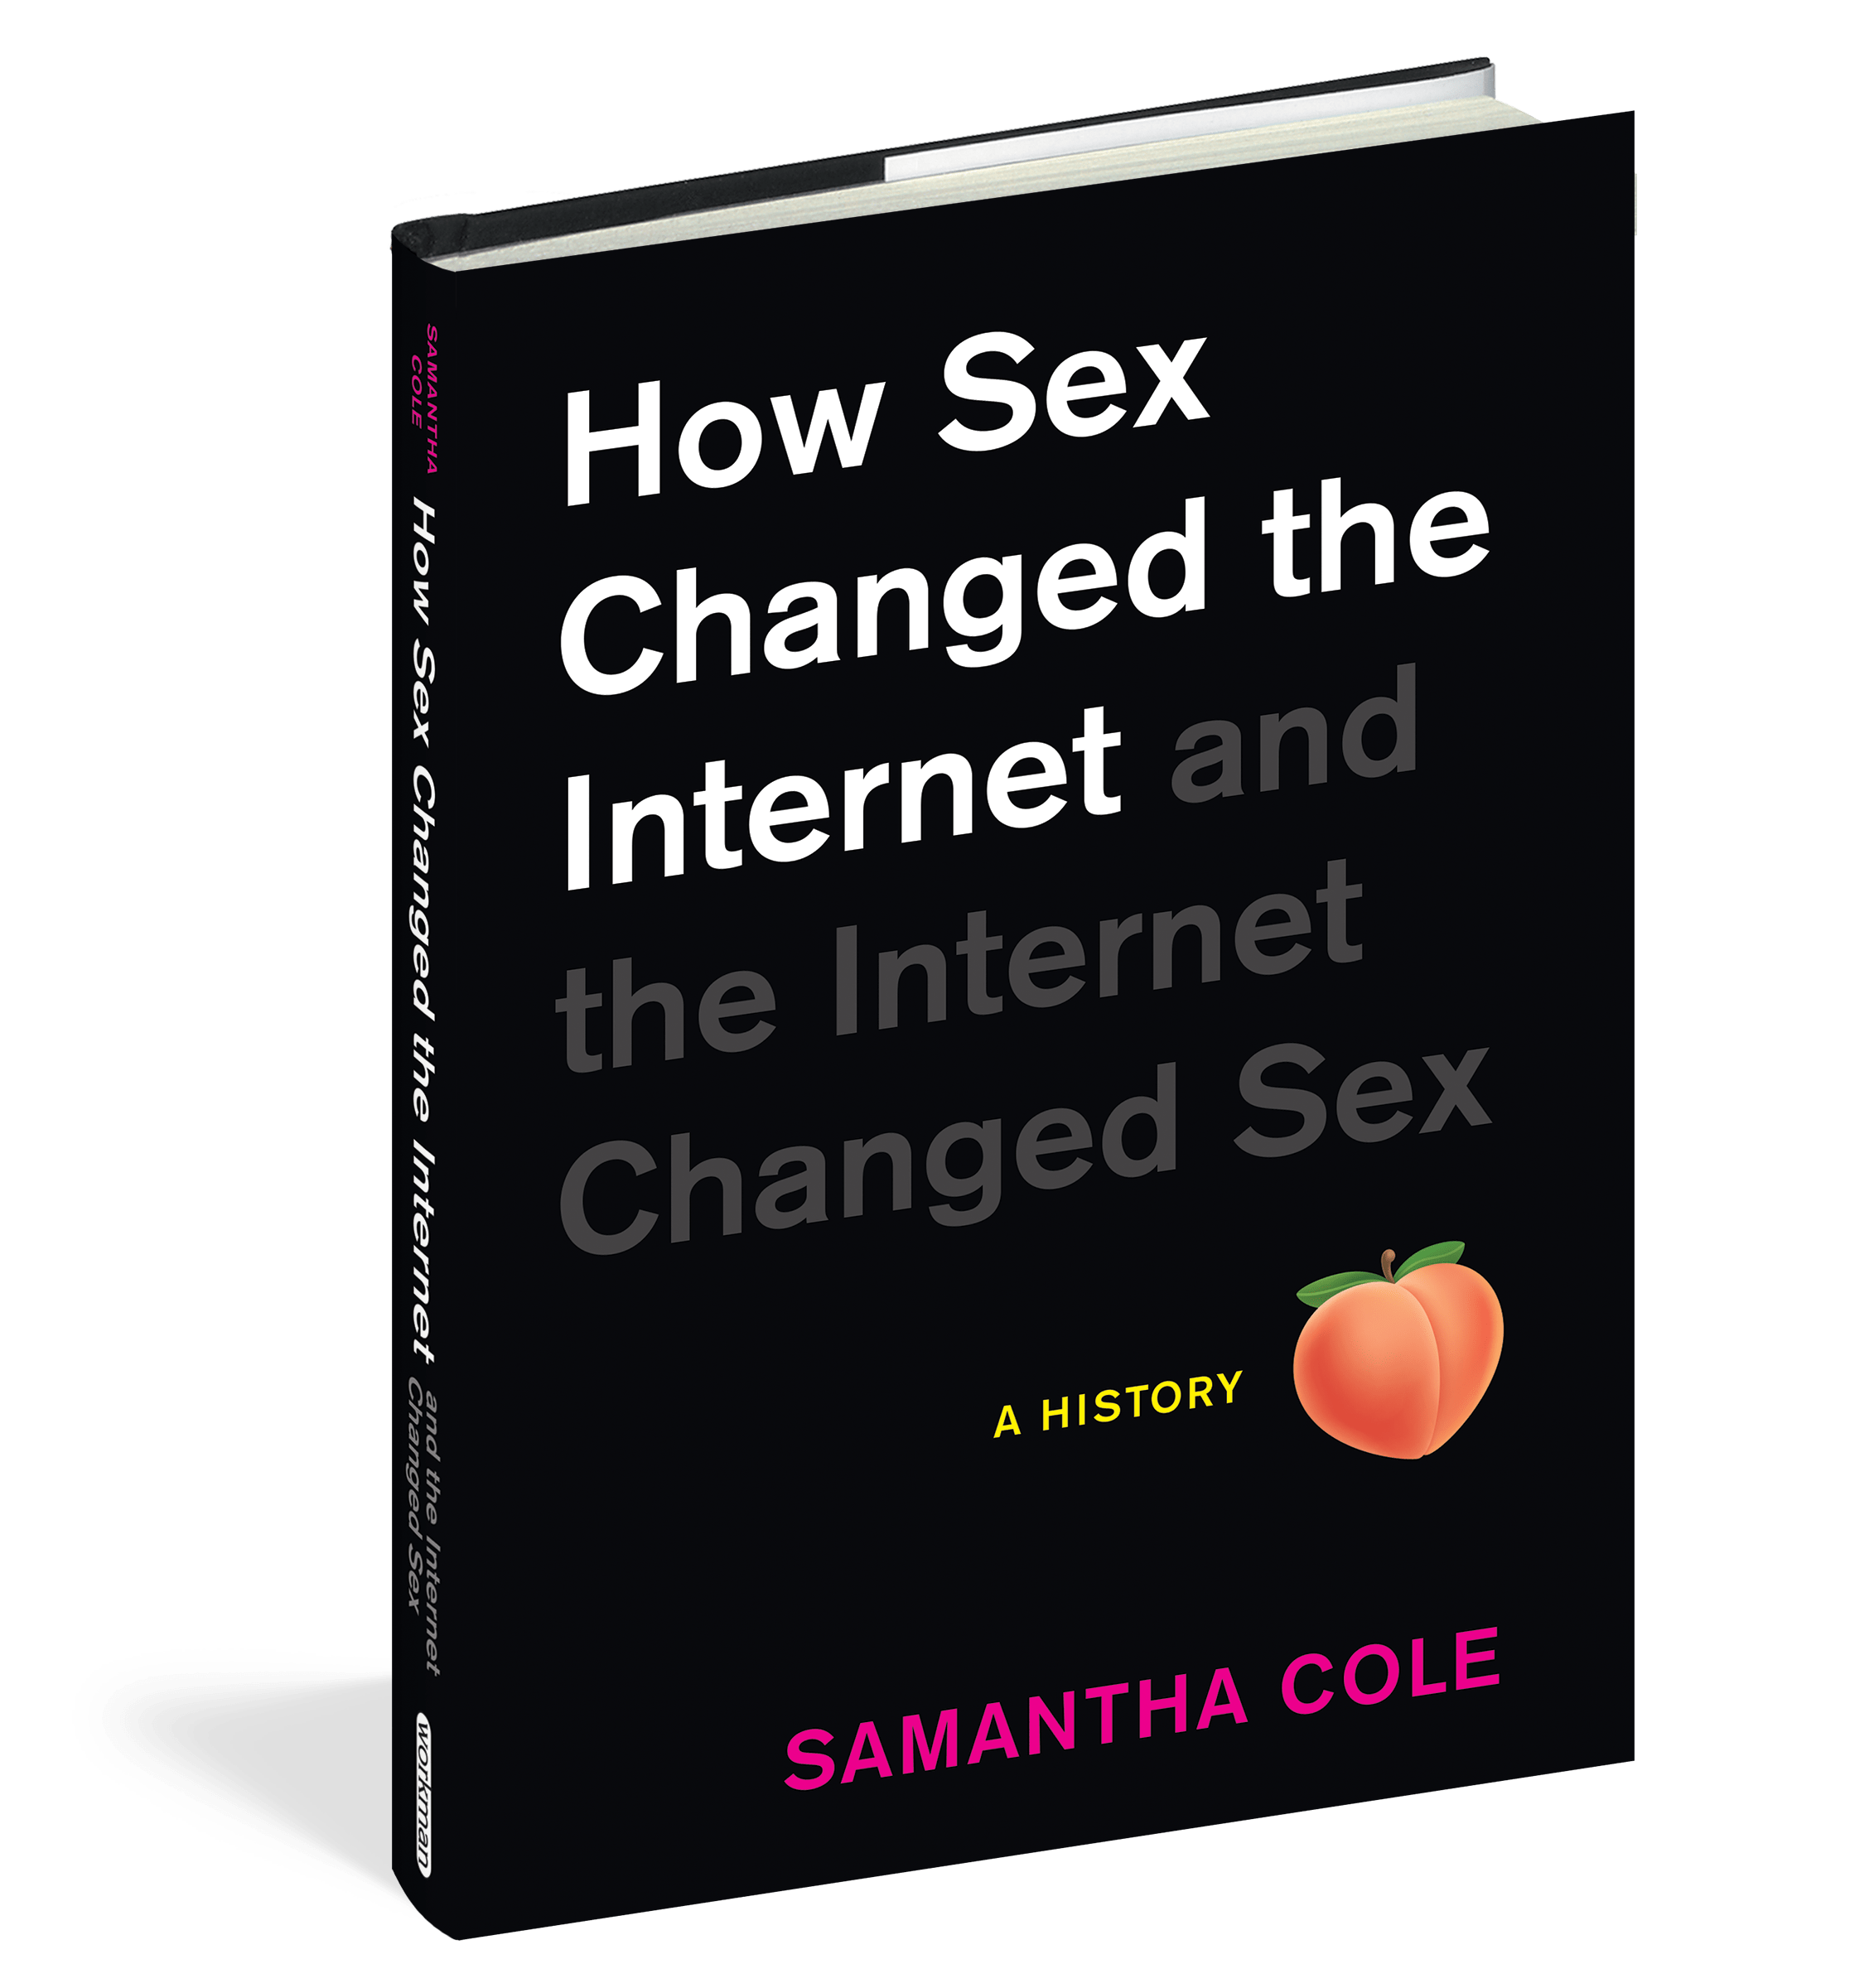 Book Launch: How Sex Changed the Internet and the Internet Changed Sex by Samantha Cole, Moderated by Liara Roux